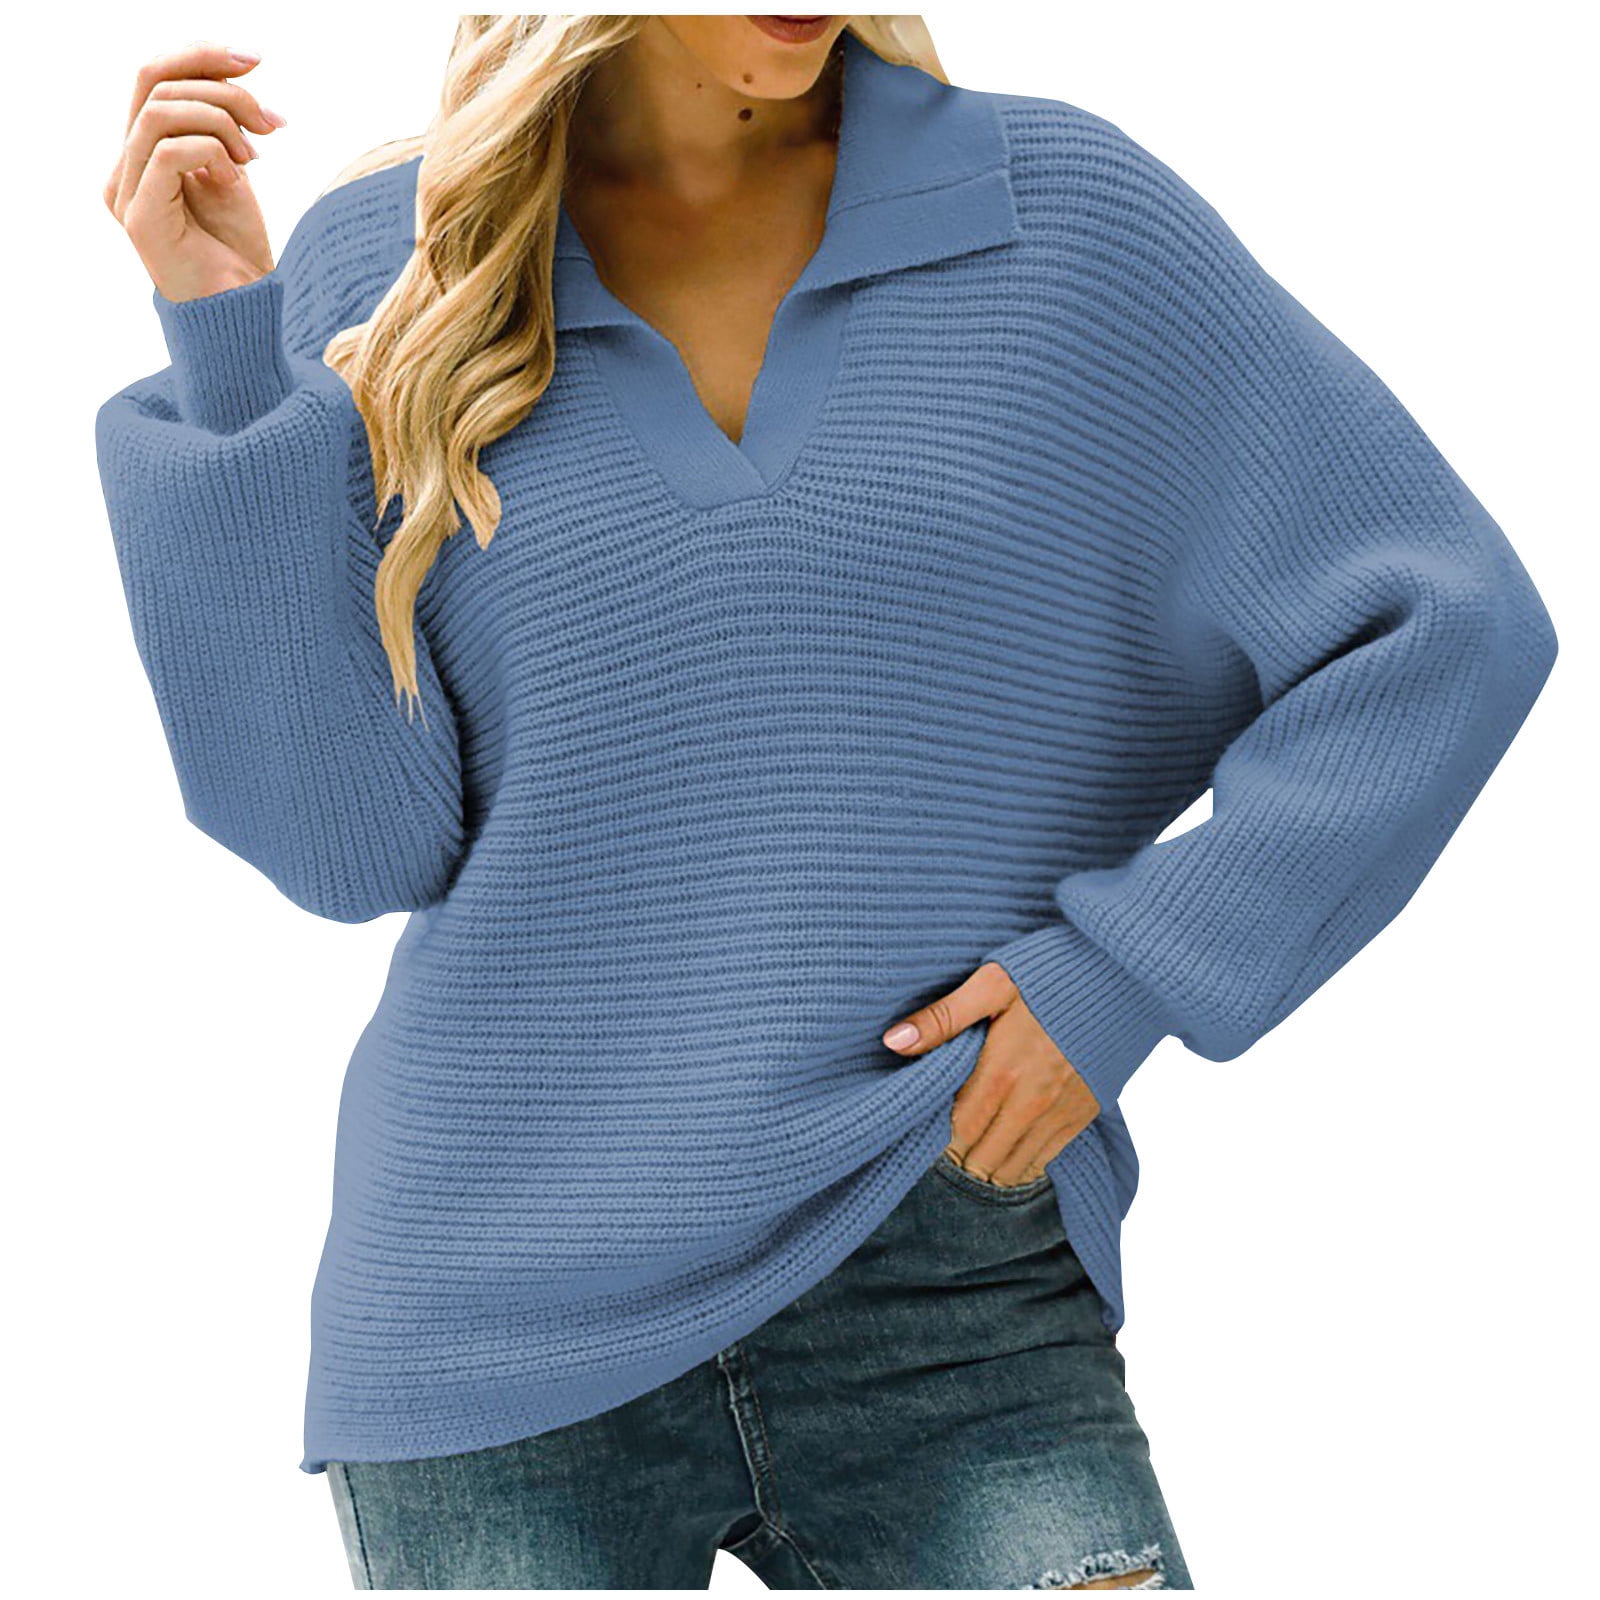 YSJZBS Sweaters For Women 8071 Women's Round Neck Pullover Hundred Sleeve  Sweater Shirts for plus Size Women